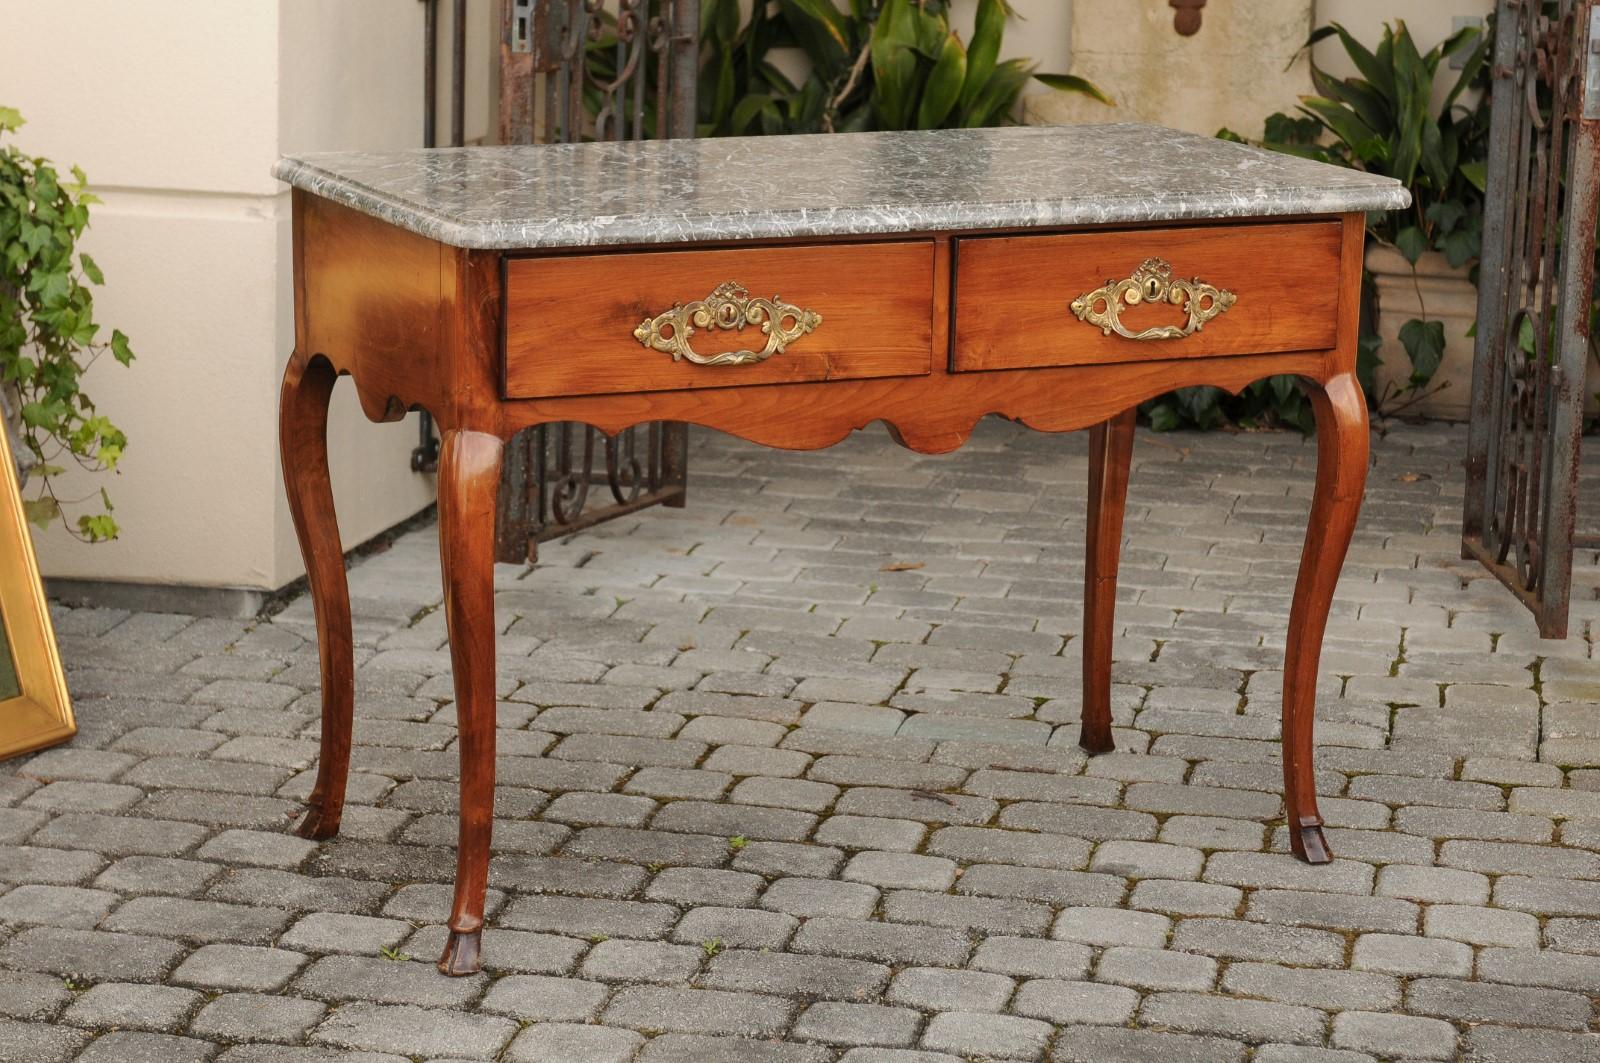 A French Napoleon III period walnut console table from the mid-19th century, with grey veined marble top, two drawers and cabriole legs. Born in France in the early years of Emperor Napoleon III's reign, this exquisite console table features a